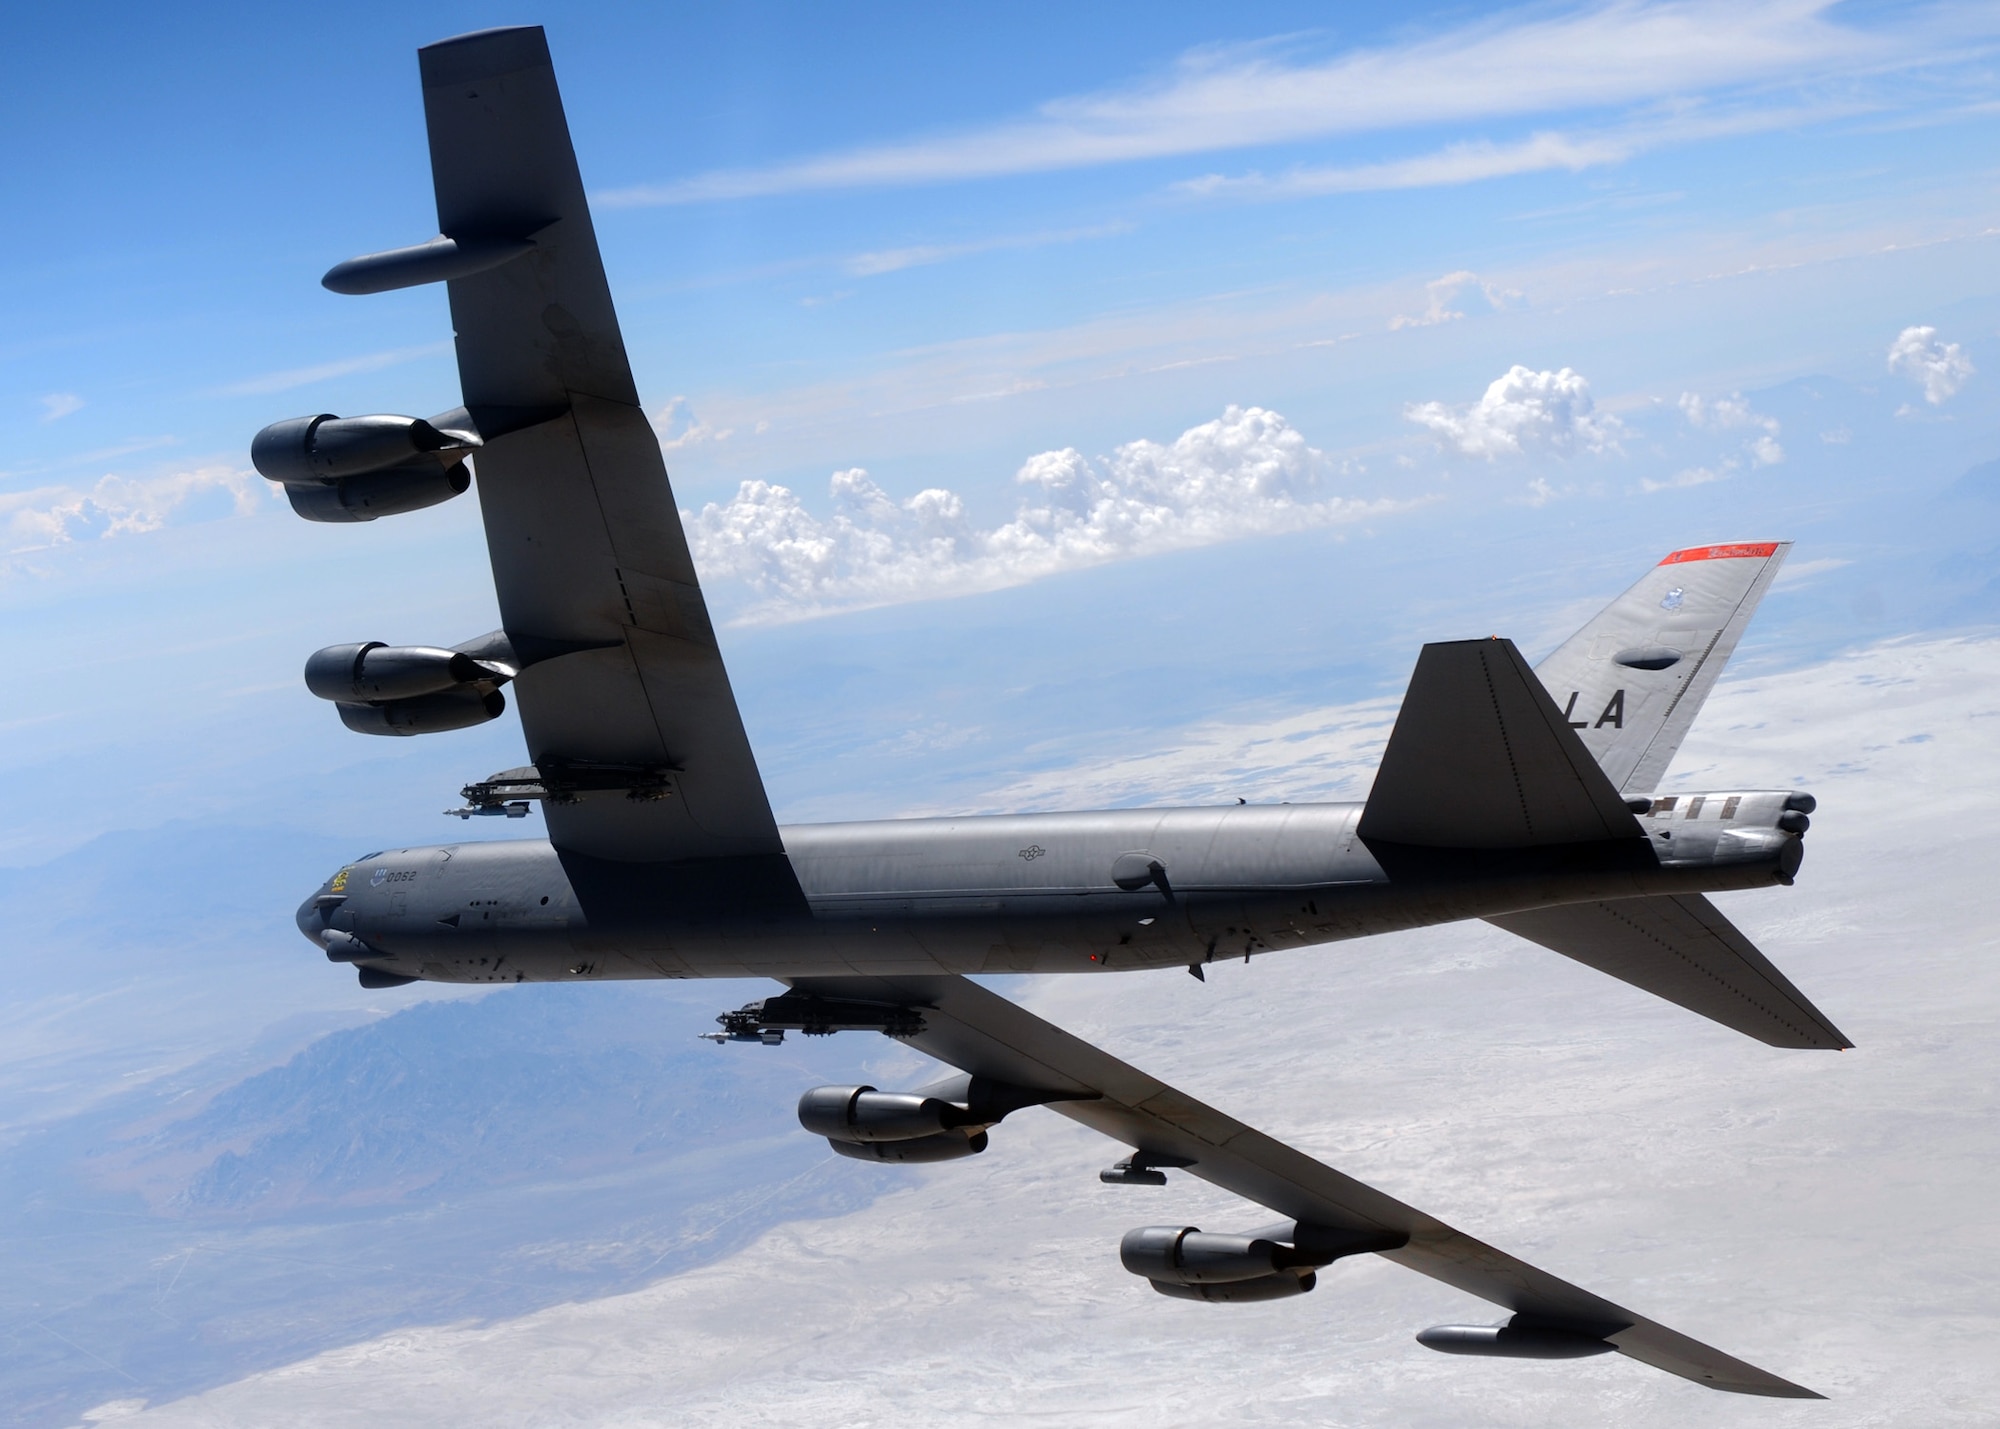 A B-52 Stratofortress from the 2nd Bomb Wing banks right during a Combat Hammer mission at Hill Air Force Base, Utah.  Combat Hammer is an air-to-ground Weapons System Evaluation Program maintained by the 86th Fighter Weapons Squadron.  Combat Hammer marked the first of three weeks of evaluation at Hill AFB by the 53rd Weapons Evaluation Group.  Combat Archer, an air-to-air evaluation, is the second week, followed by a combined air and ground WSEP in the final week.  The WSEP program is used to evaluate the effectiveness and suitability of combat air force weapon systems. The evaluations are accomplished during tactical deliveries of fighter, bomber and unmanned aerial system precision guided munitions, on realistic targets with air-to-air and surface-to-air defenses. For many of the aircrew participating in WSEP, it is the first time employing live weapons. This provides a level of combat experience many units face during combat. (Courtesy photo.)
